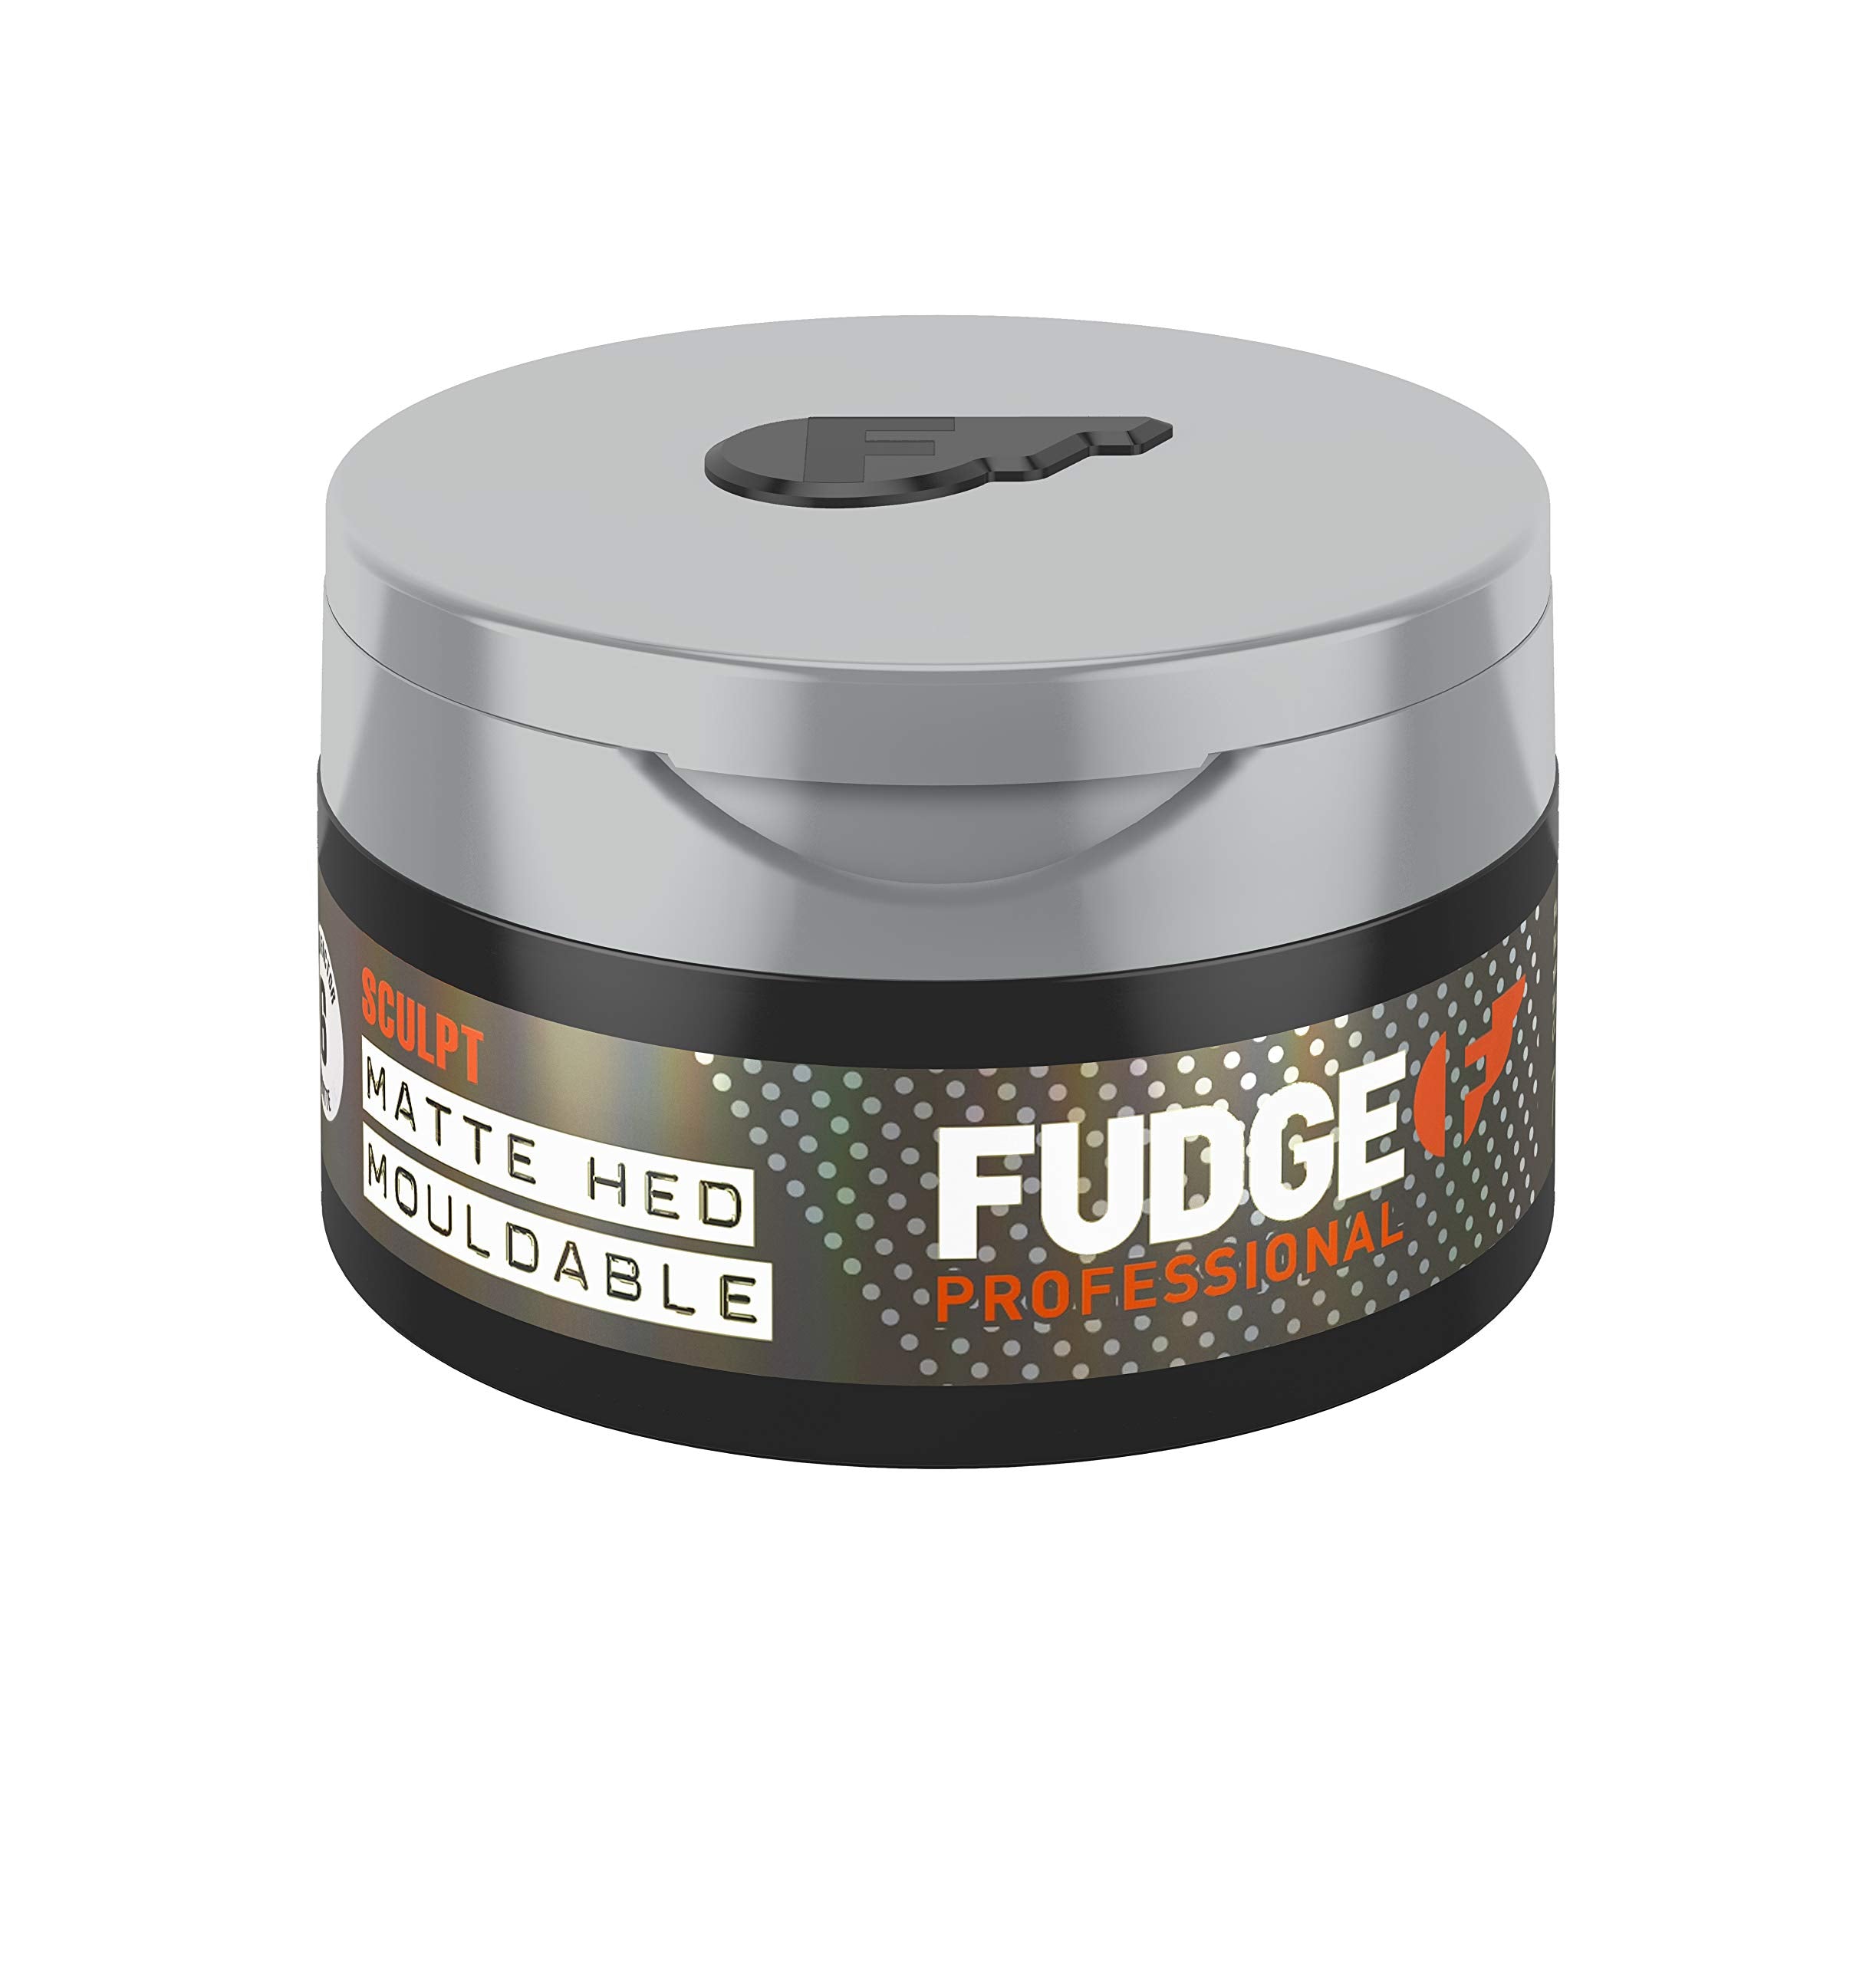 Fudge Professional Hair Clay Cream, Matte Hed Mouldable, Flexible Medium Hold Hair Styling Crème with Humidity Protection, For Fine Hair, For Men, 75 g